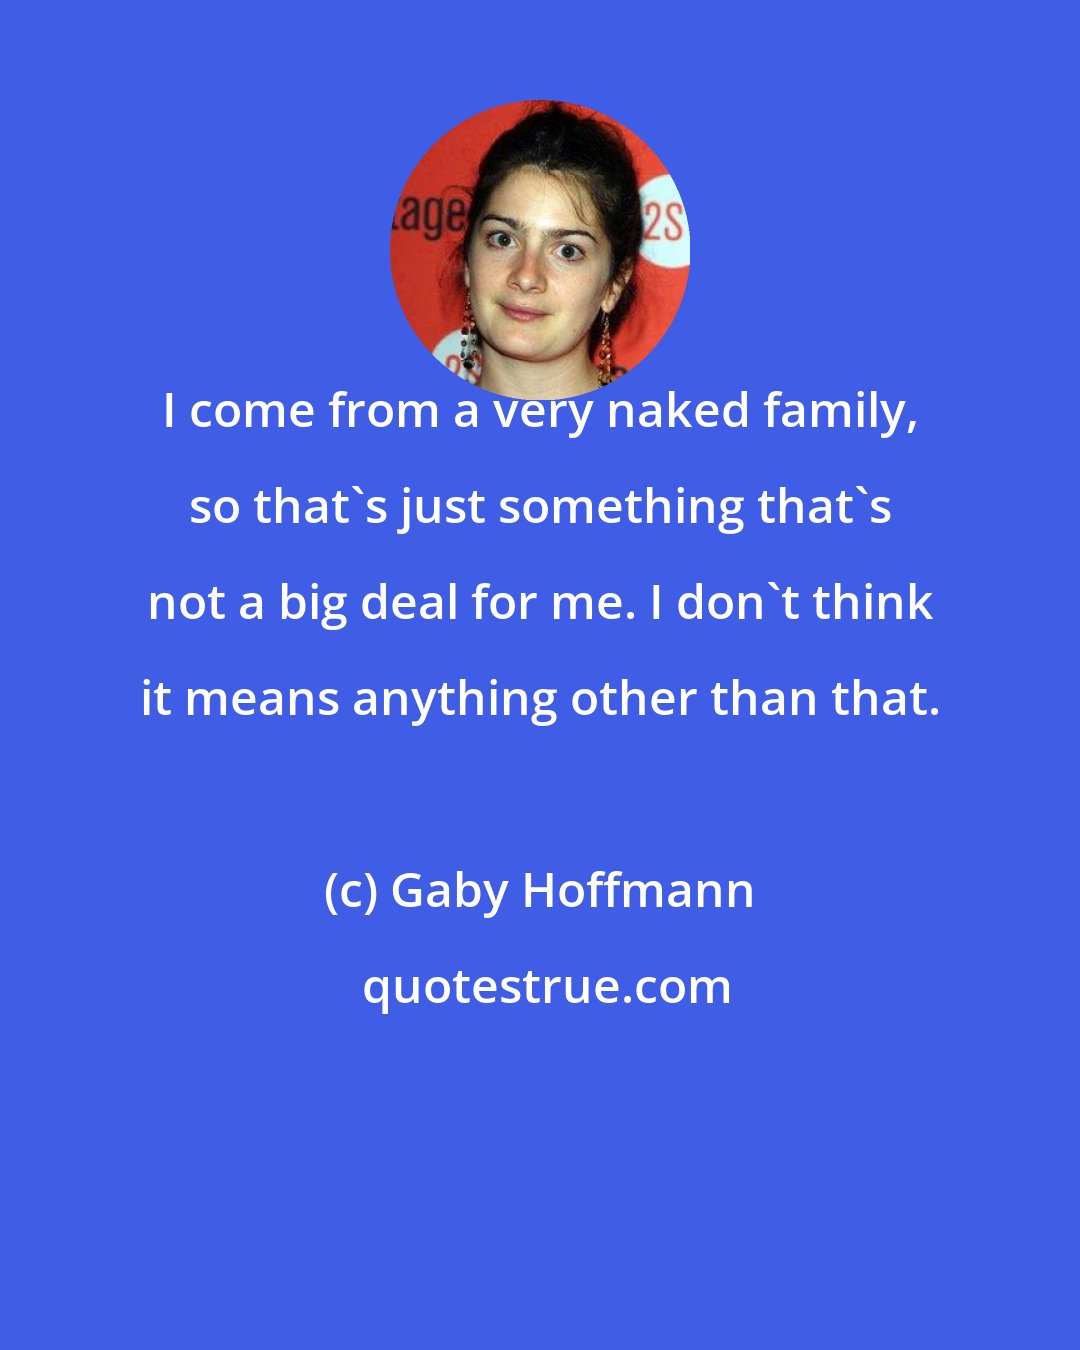 Gaby Hoffmann: I come from a very naked family, so that's just something that's not a big deal for me. I don't think it means anything other than that.